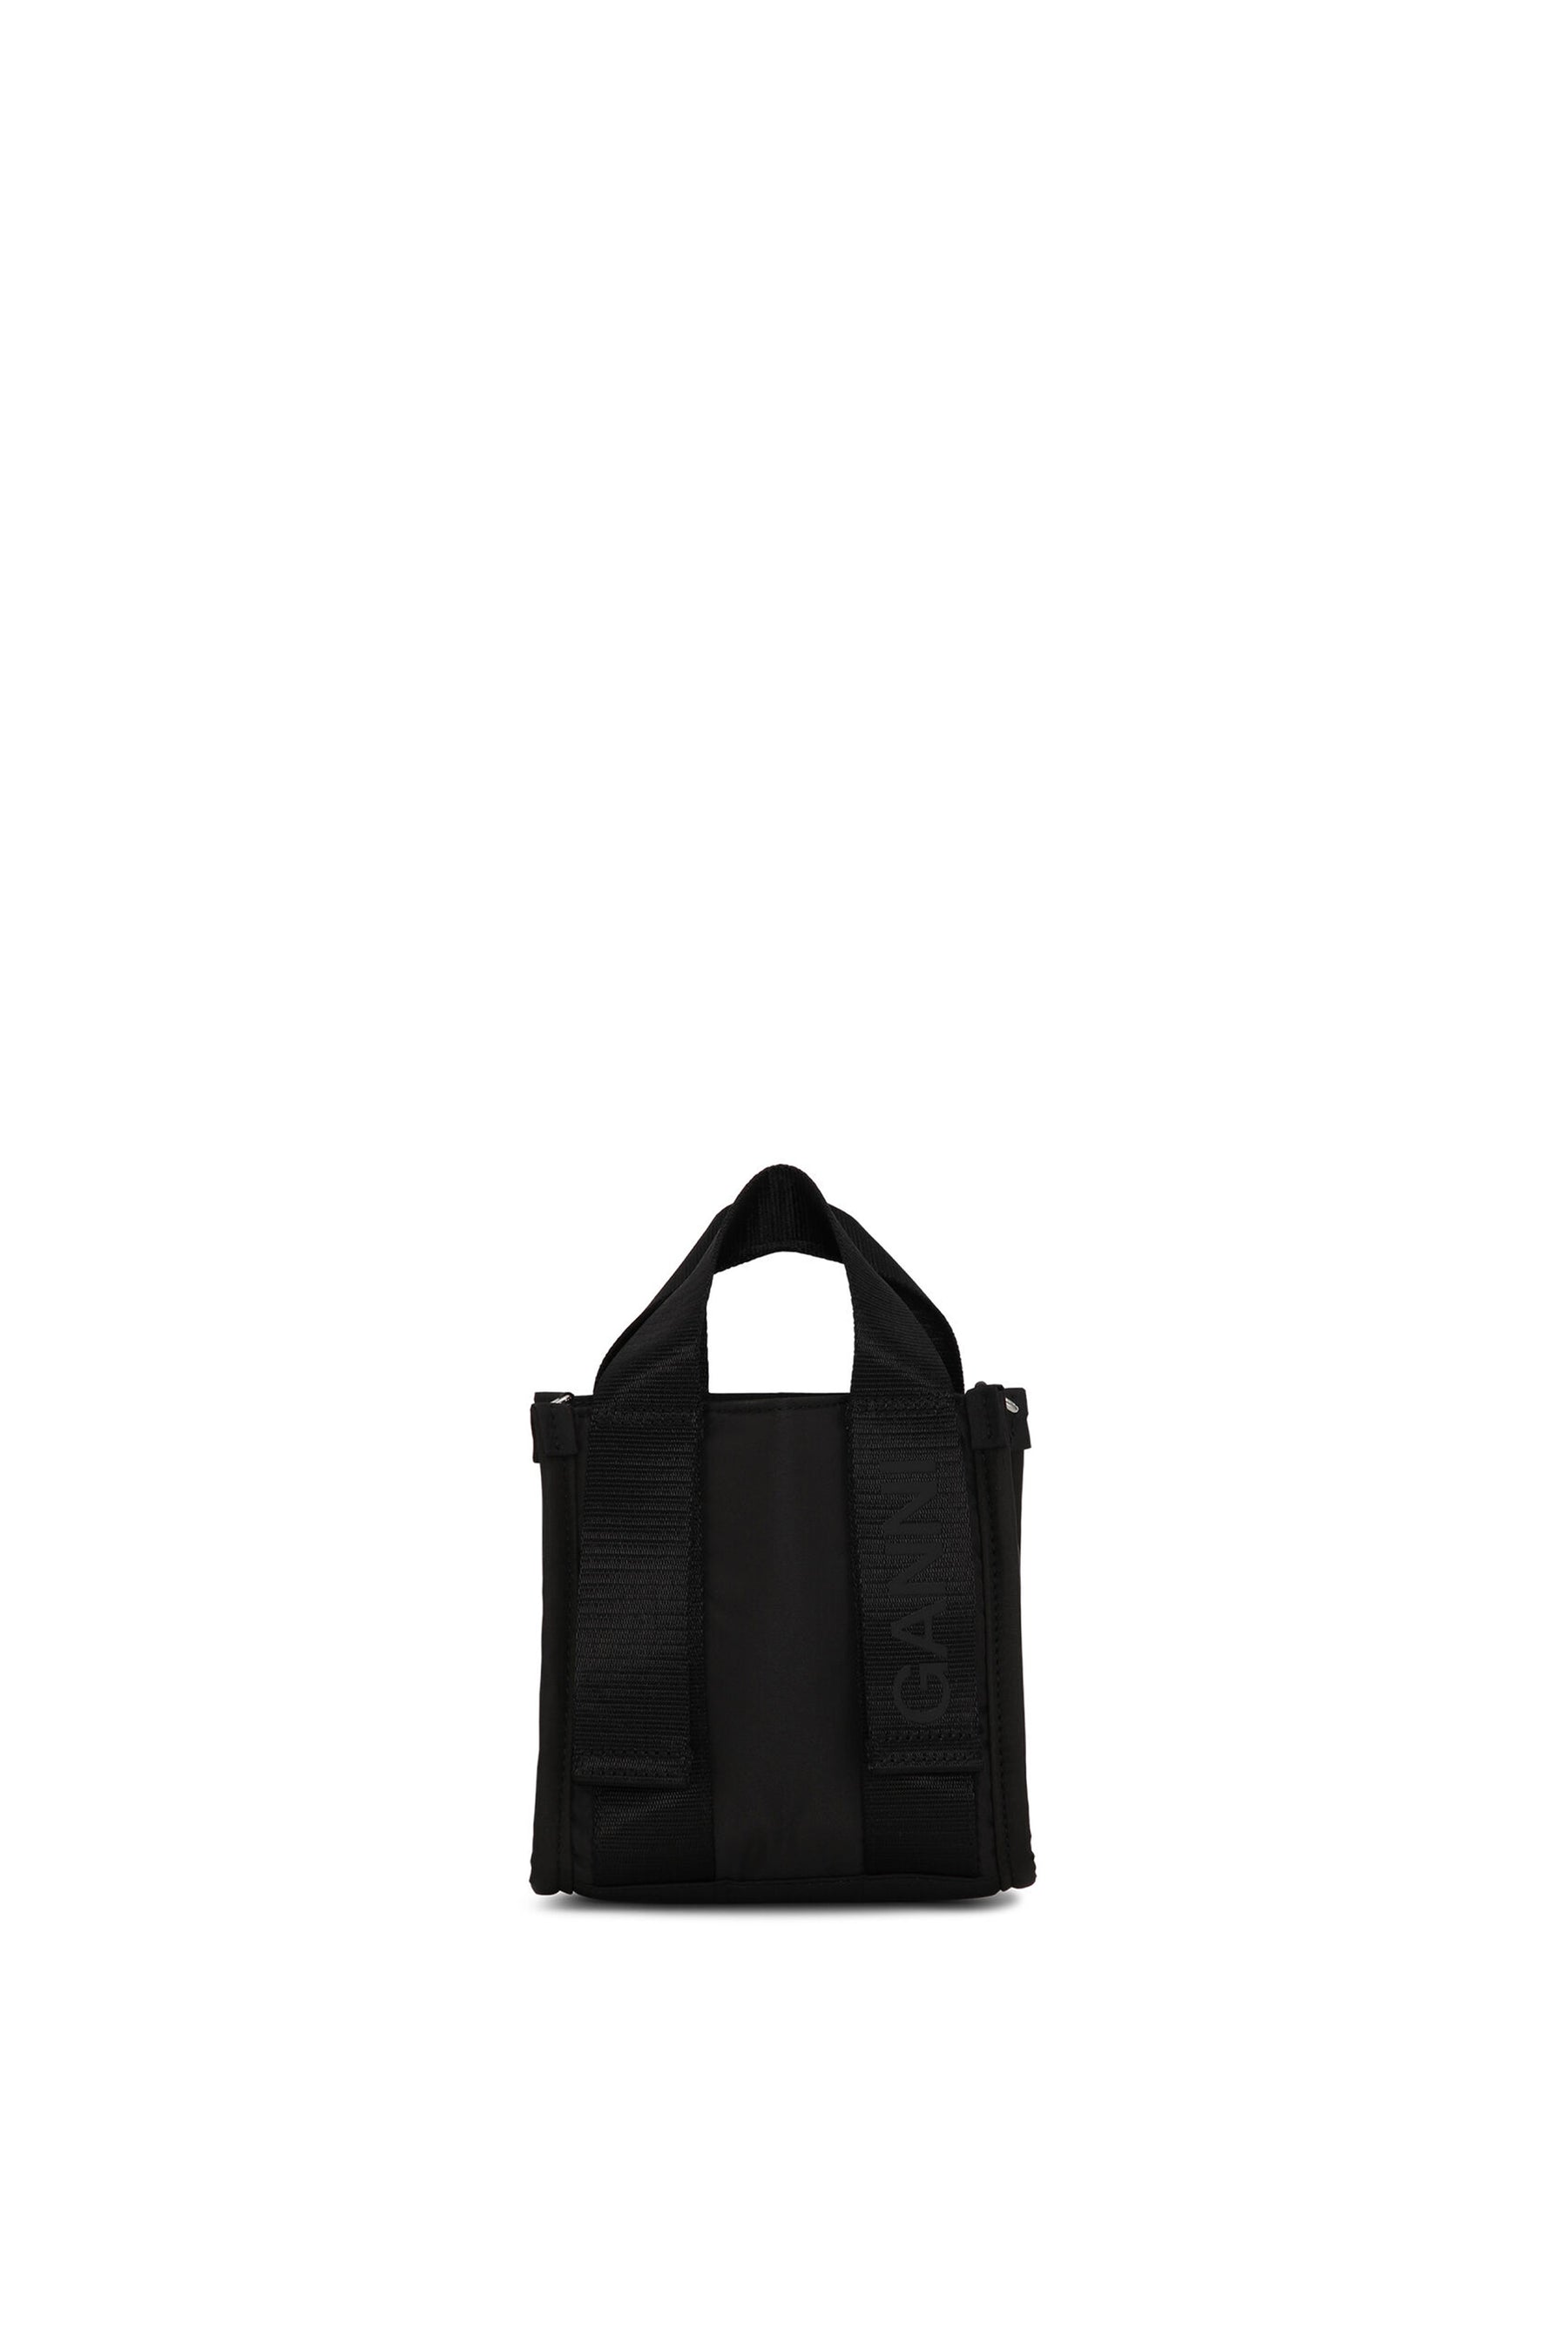 RECYCLED MINI TOTE / BLK